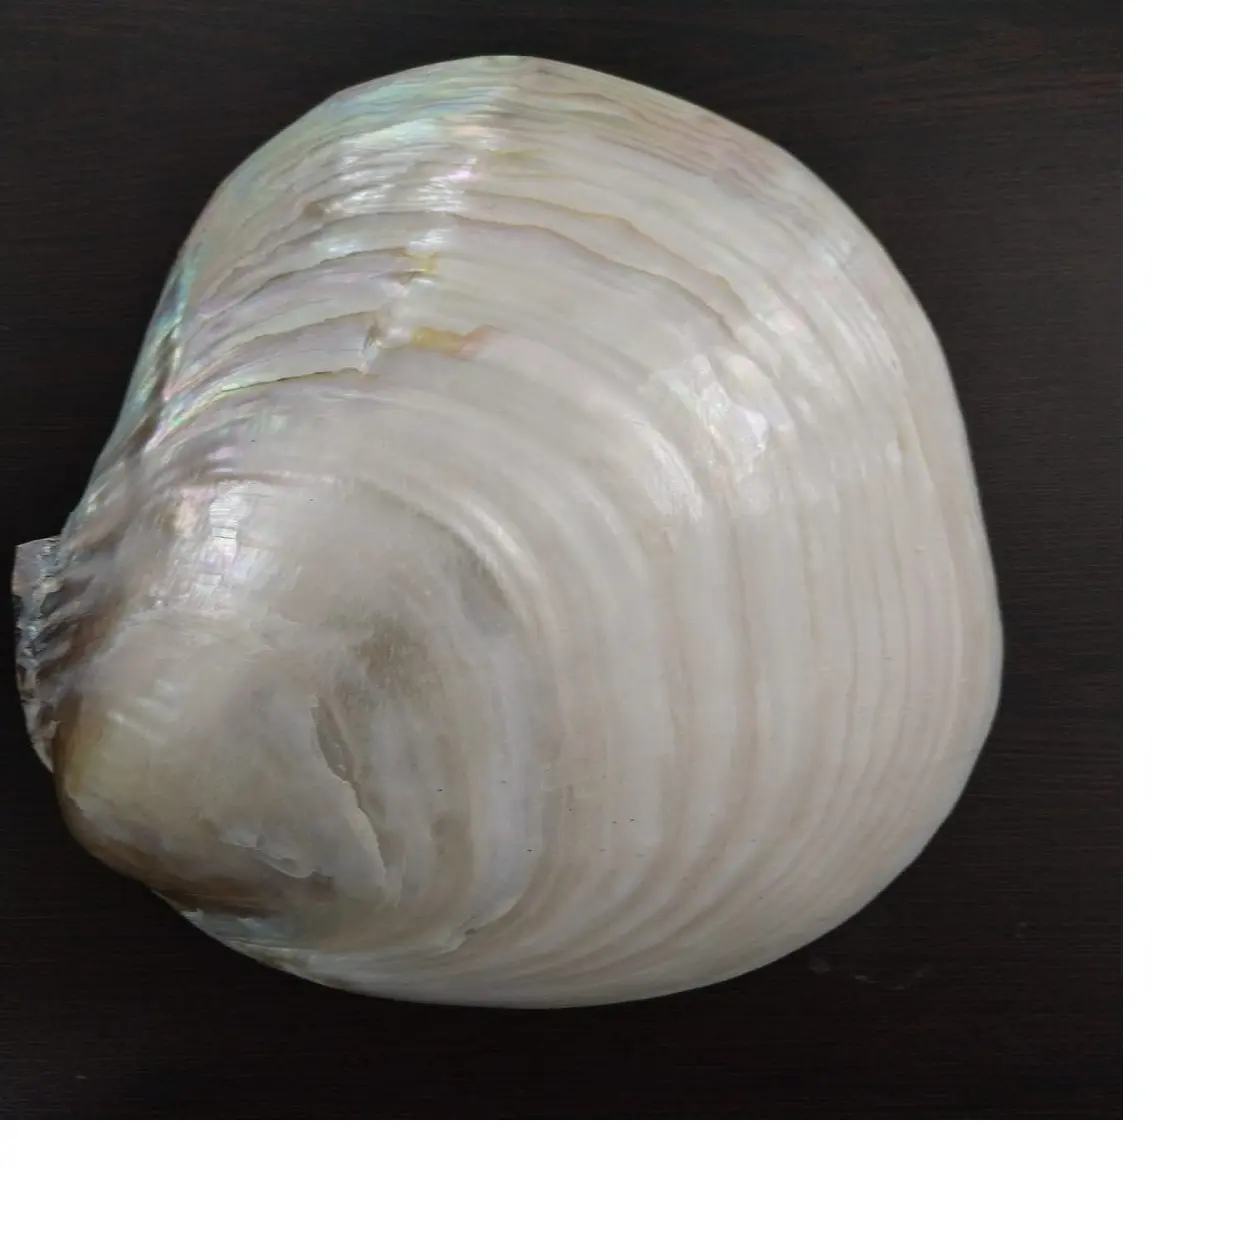 natural polished river clam shells suitable for resale by shell stores and sea shell suppliers. ideal for resale